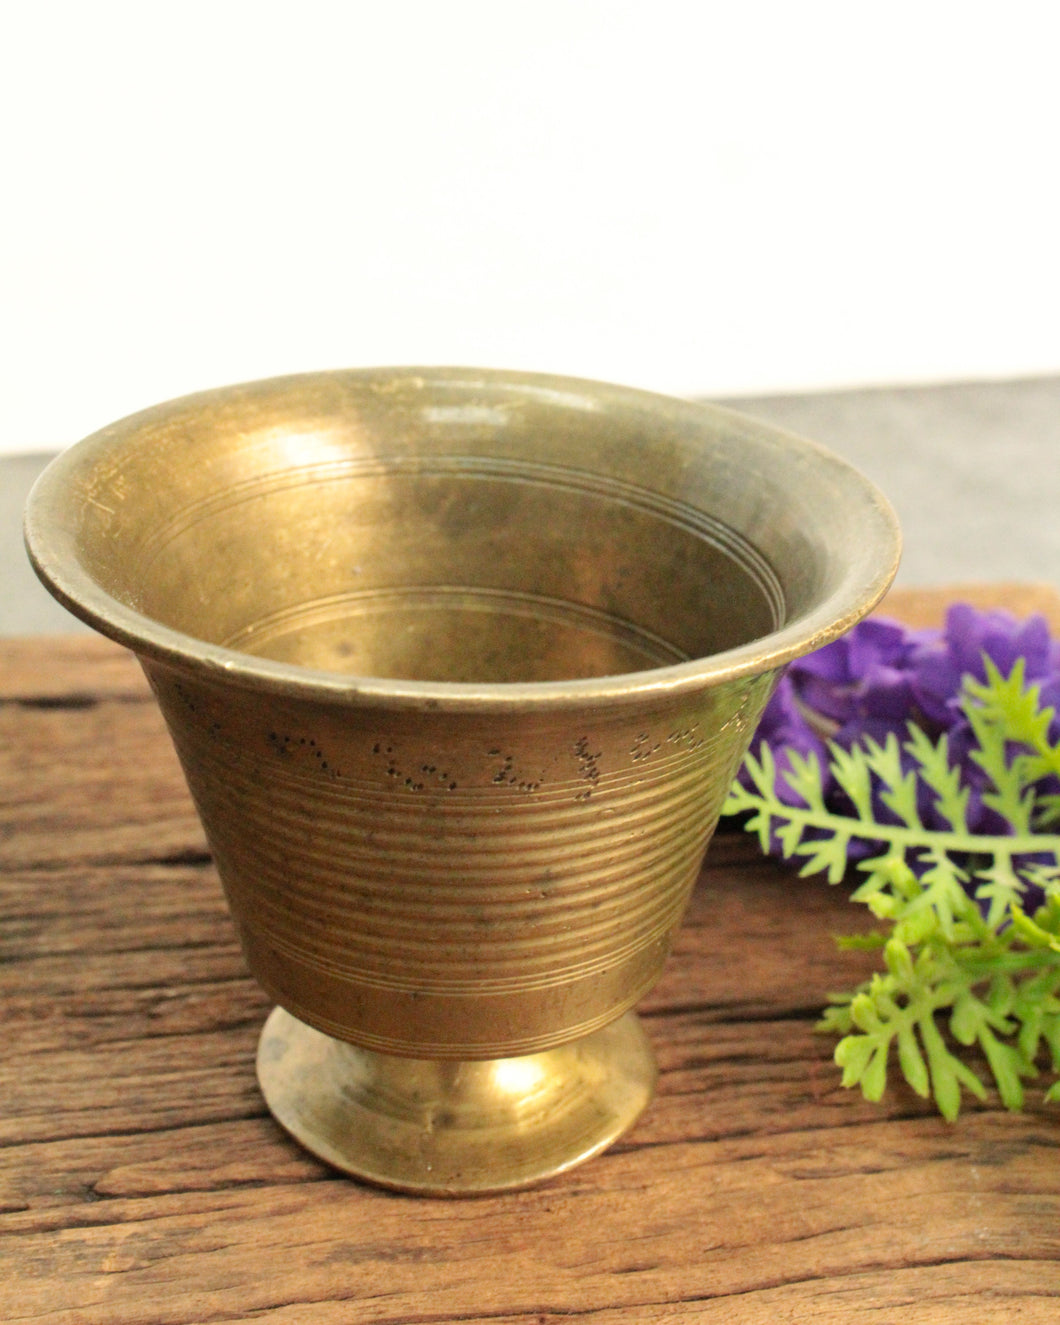 Elegant Vintage Brass Footed Glass: A Timeless Addition to Your Table